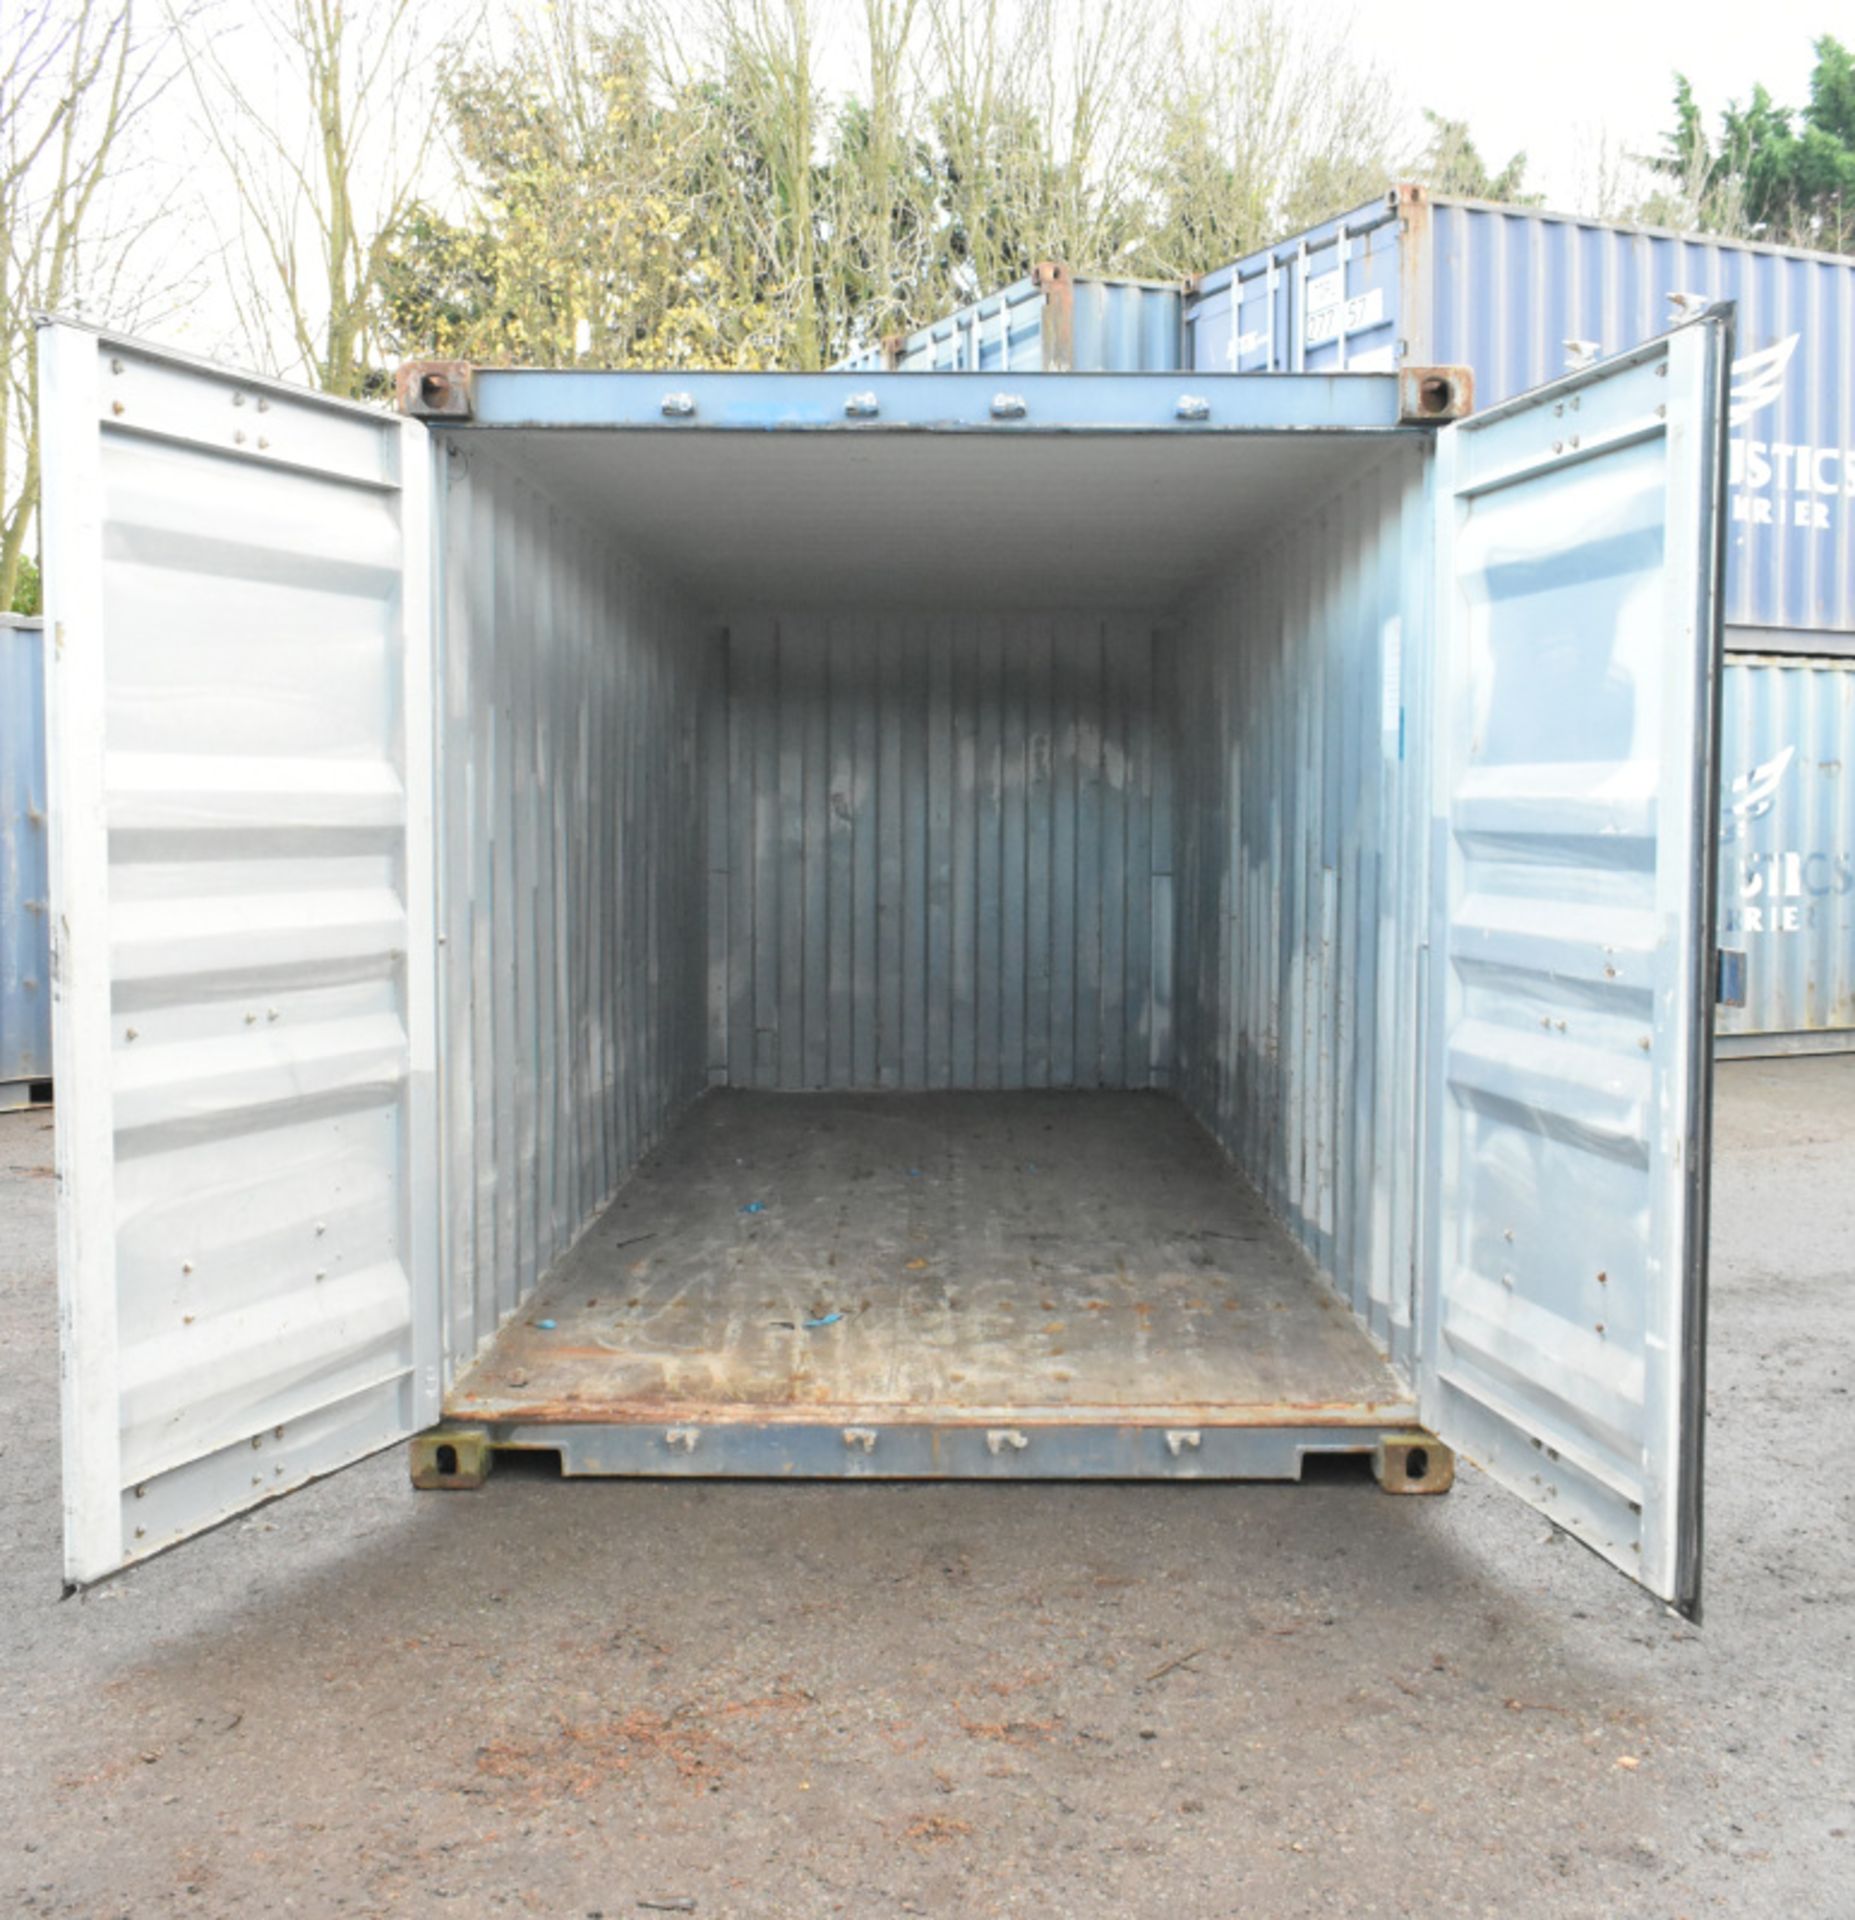 20ft ISO container - L 6.5M x W 2.44M x H 2.6M - Image 5 of 5